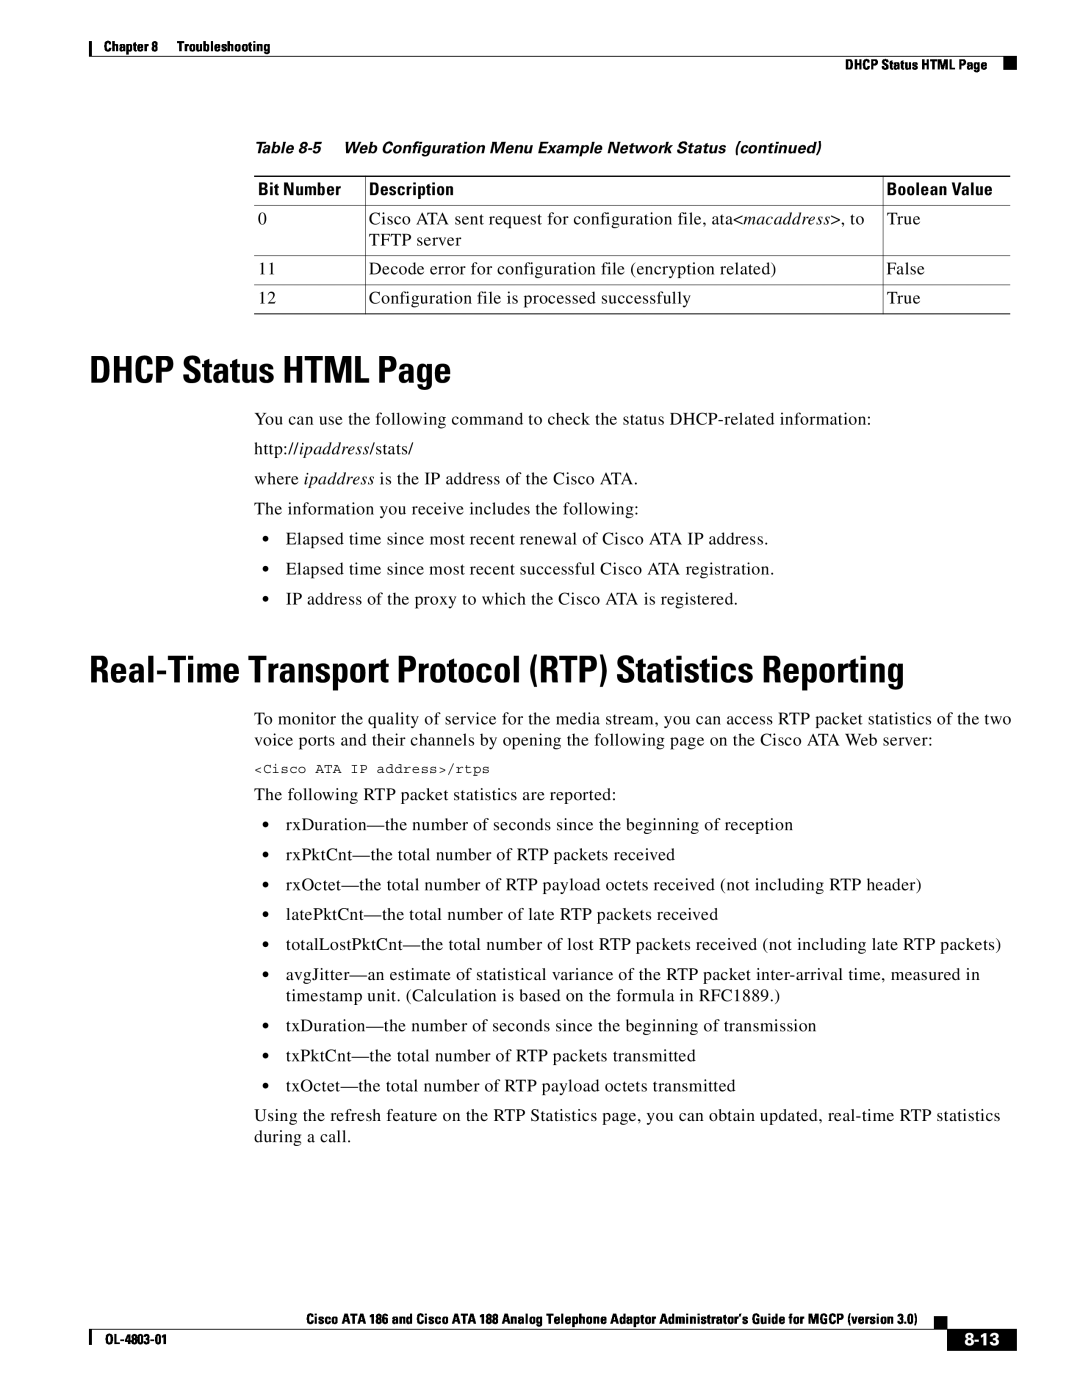 Cisco Systems ATA 188 DHCP Status HTML Page, Real-Time Transport Protocol RTP Statistics Reporting, 8-13, Description 